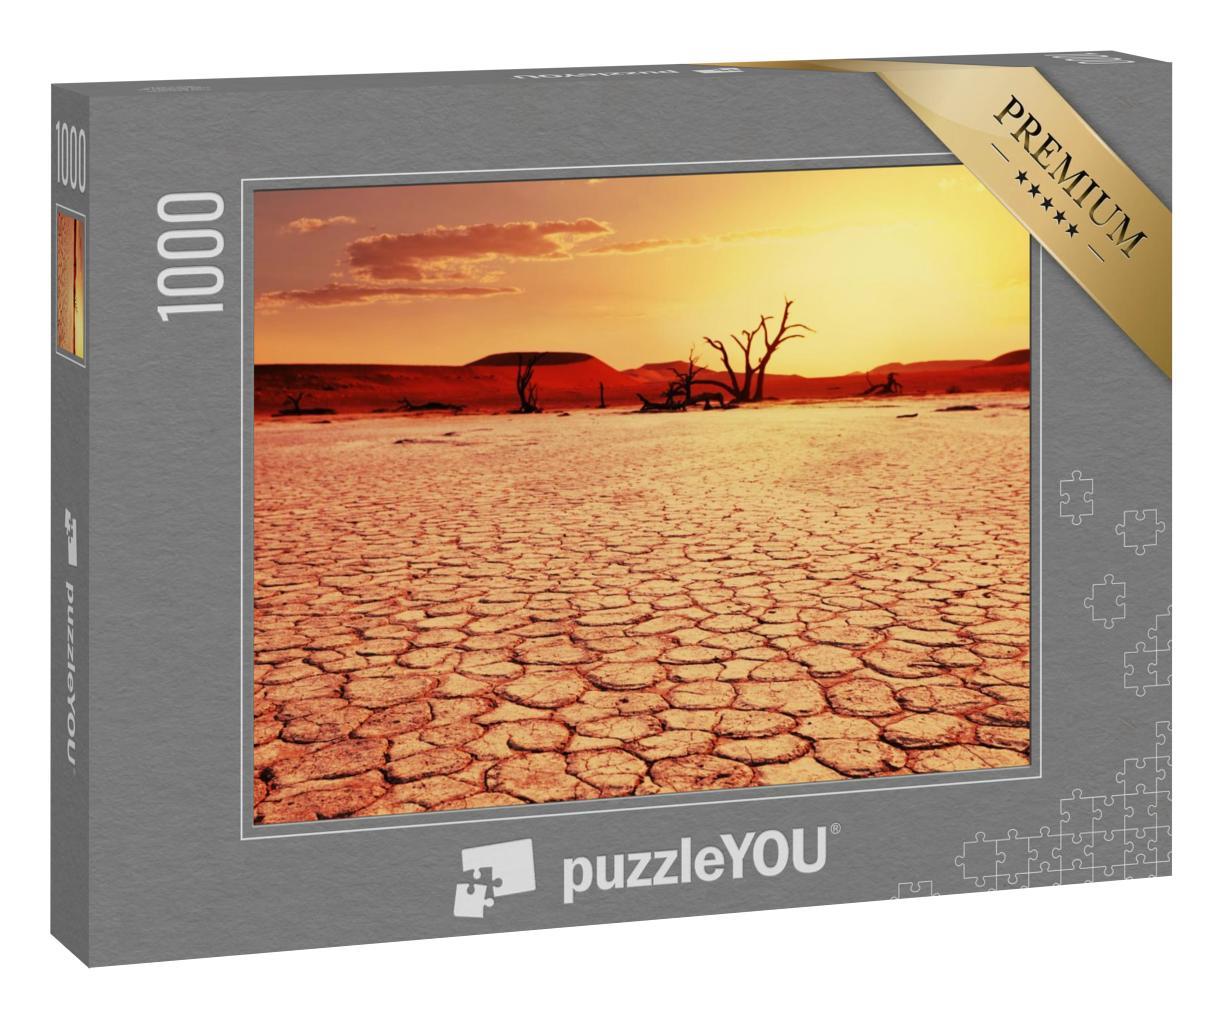 Puzzle 1000 Teile „Totes Tal in Namibia, vertrocknete Bäume, Boden aus Stein“